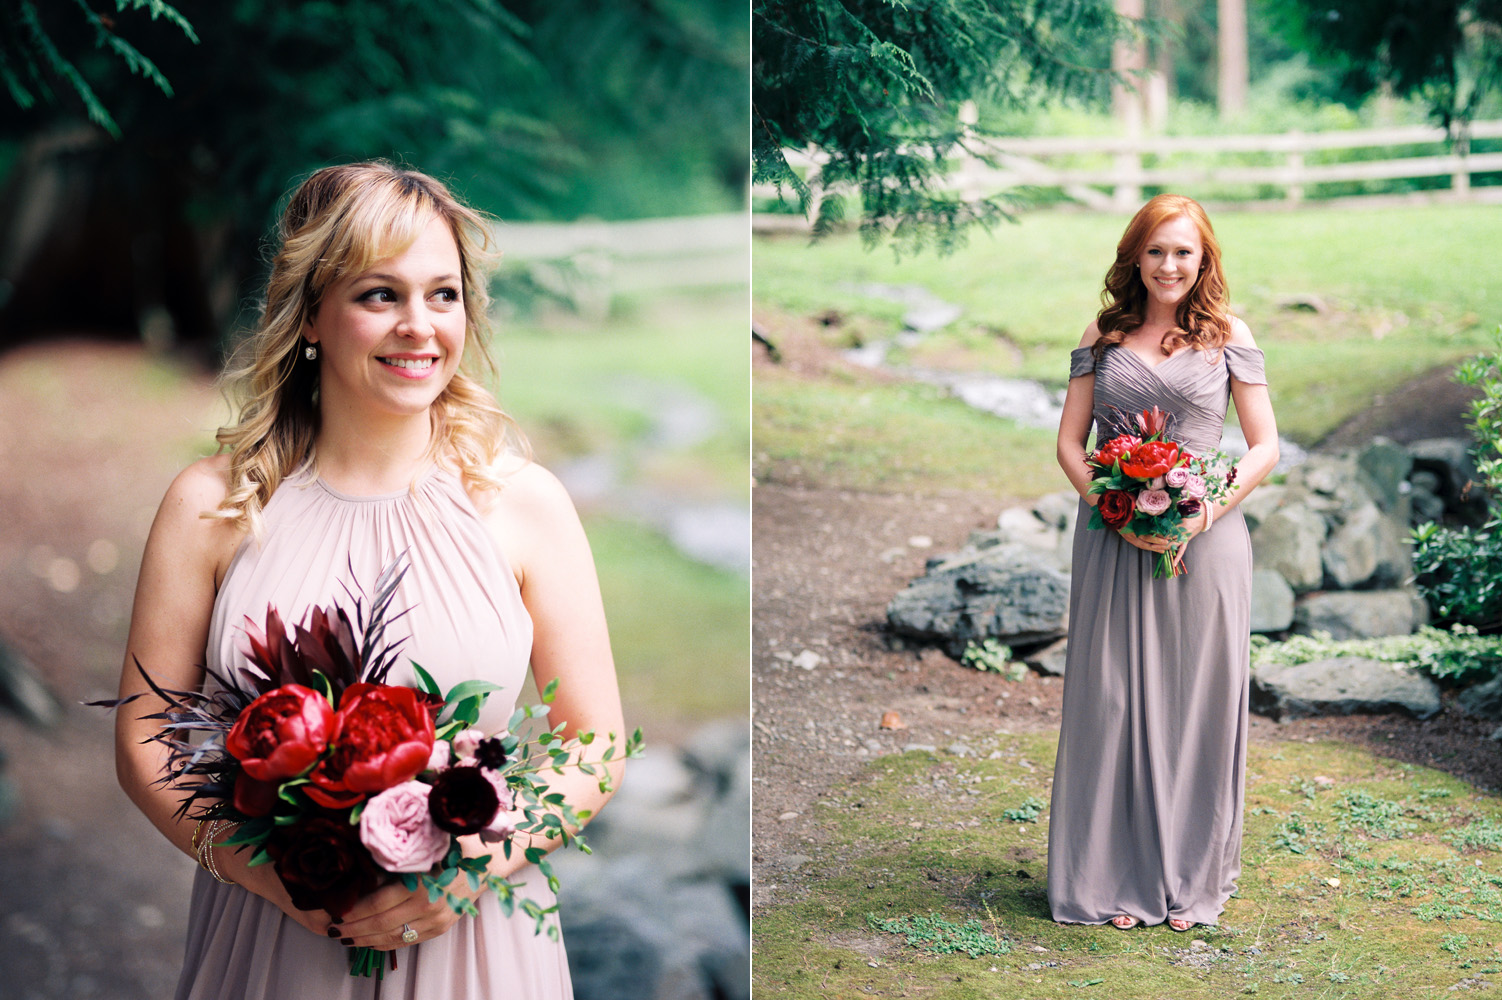 delille cellars woodinville wedding venue blush and taupe bridesmaid dresses wedding photography.jpg